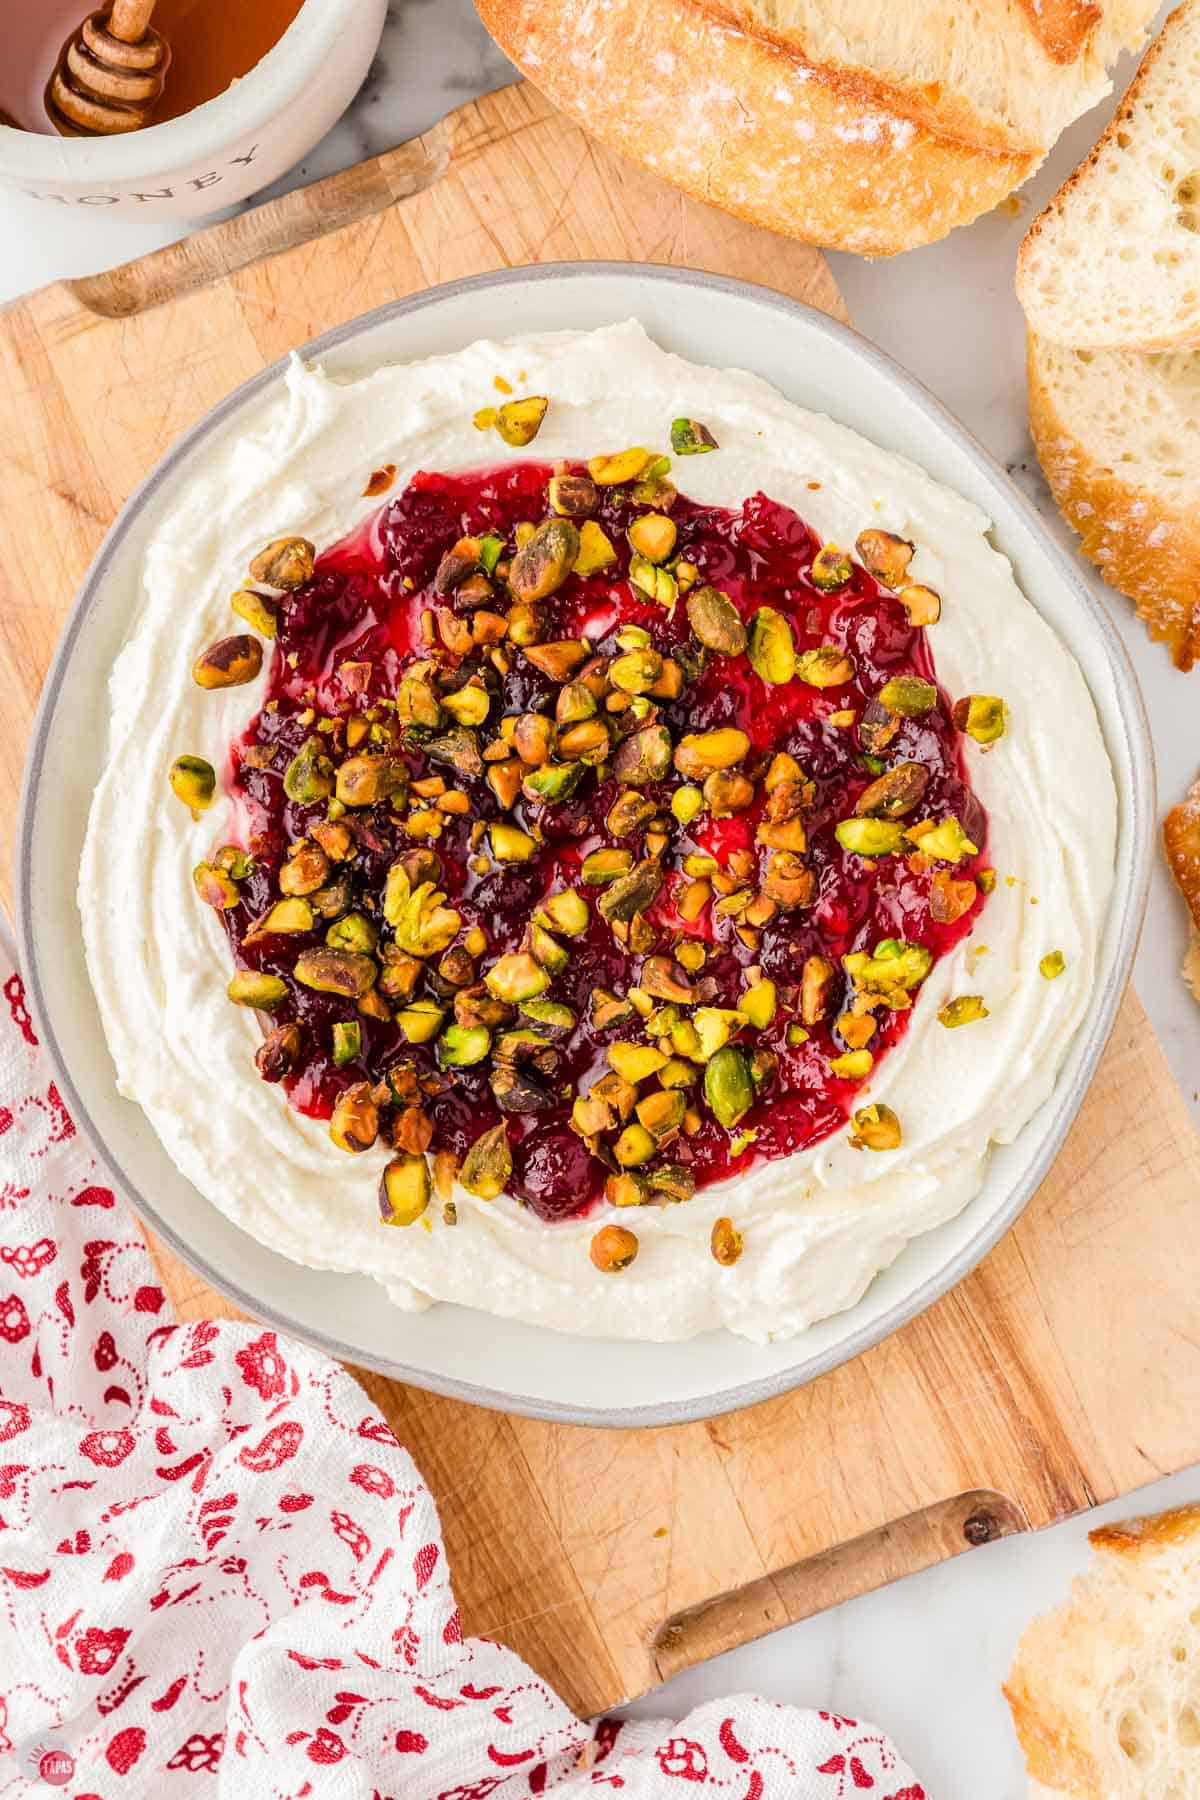 sprinkle cranberry whipped feta dip with toasted pistachios for crunch!